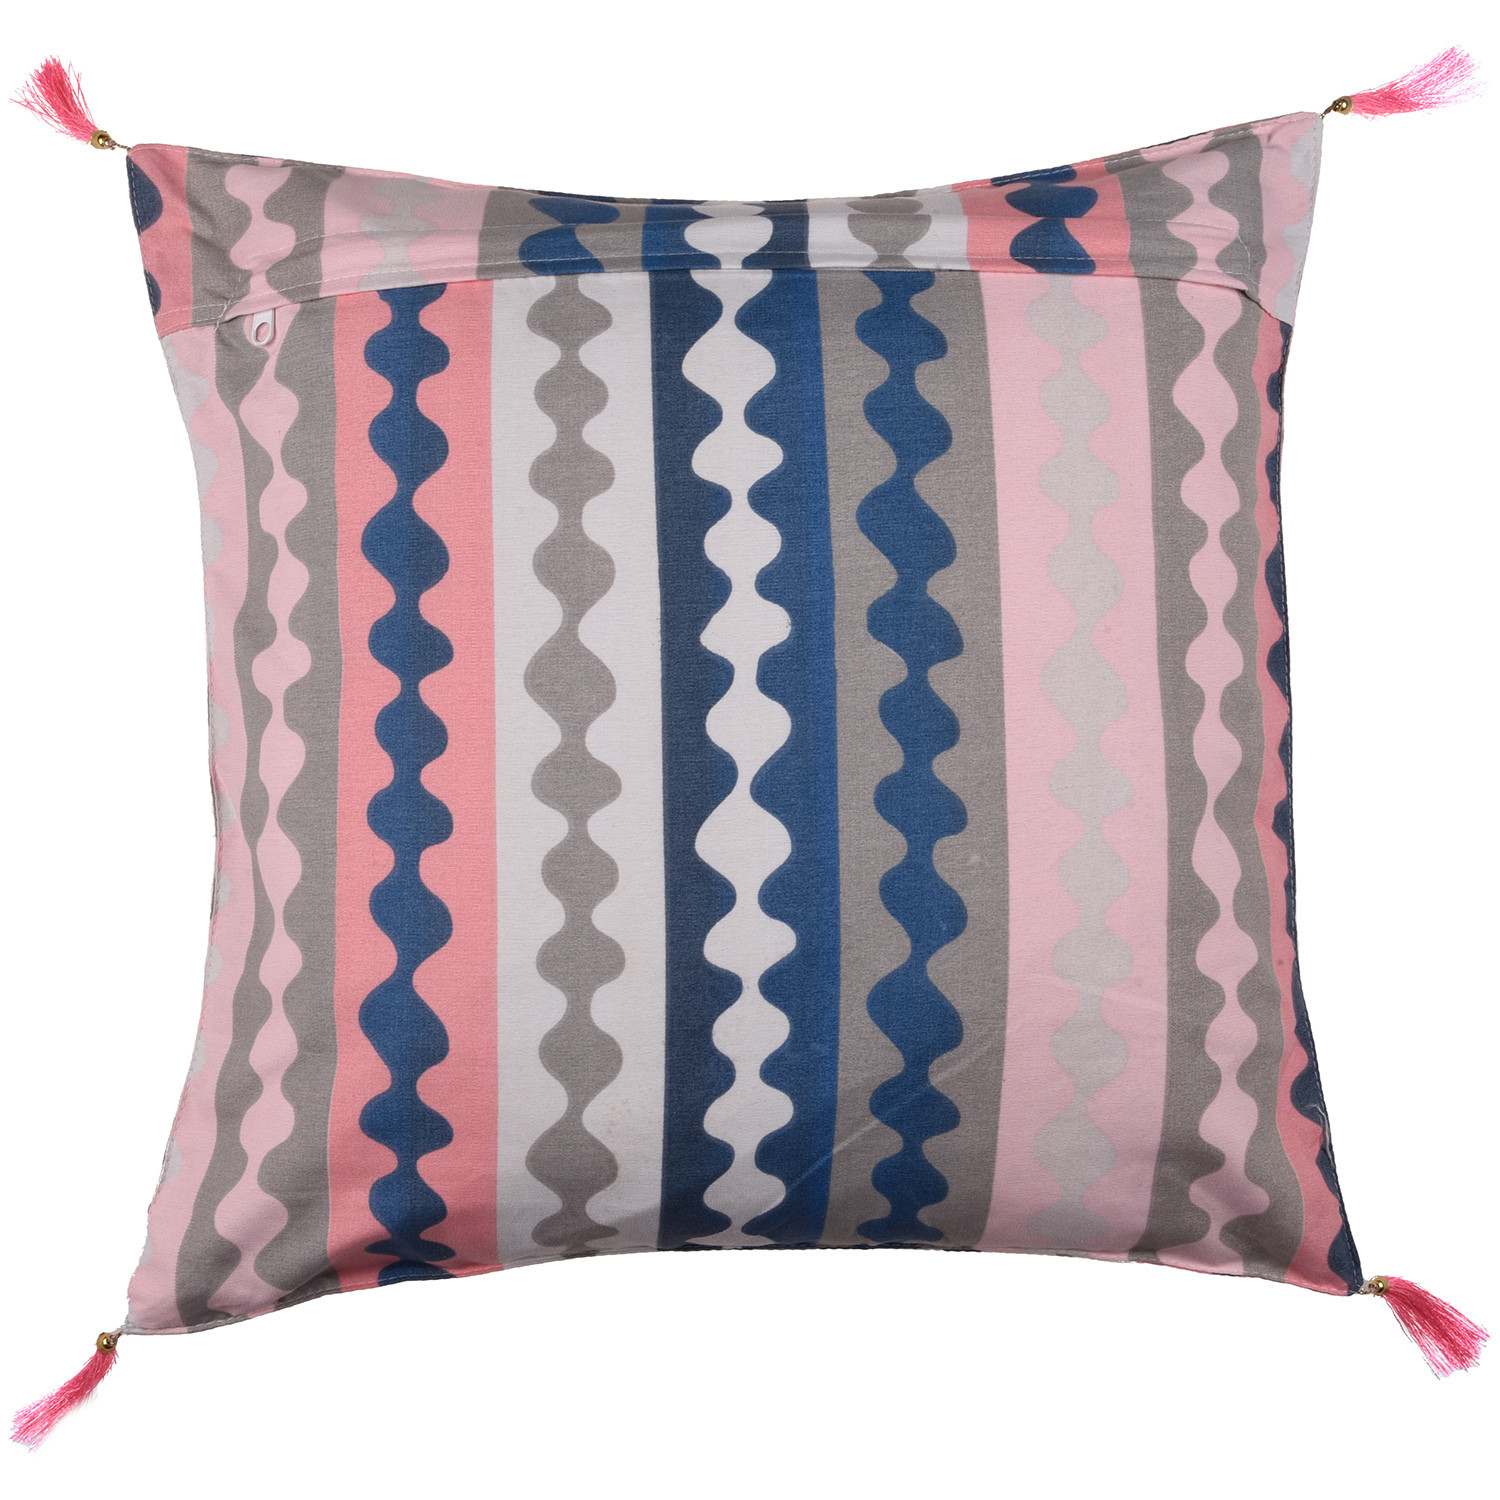 Kuber Industries Cushion Cover | Square Cushion Covers | Cotton Cushion Covers | Zig Zag Design Cushion Covers with Tassels | Set of 5 | 16 Inch | Multicolor